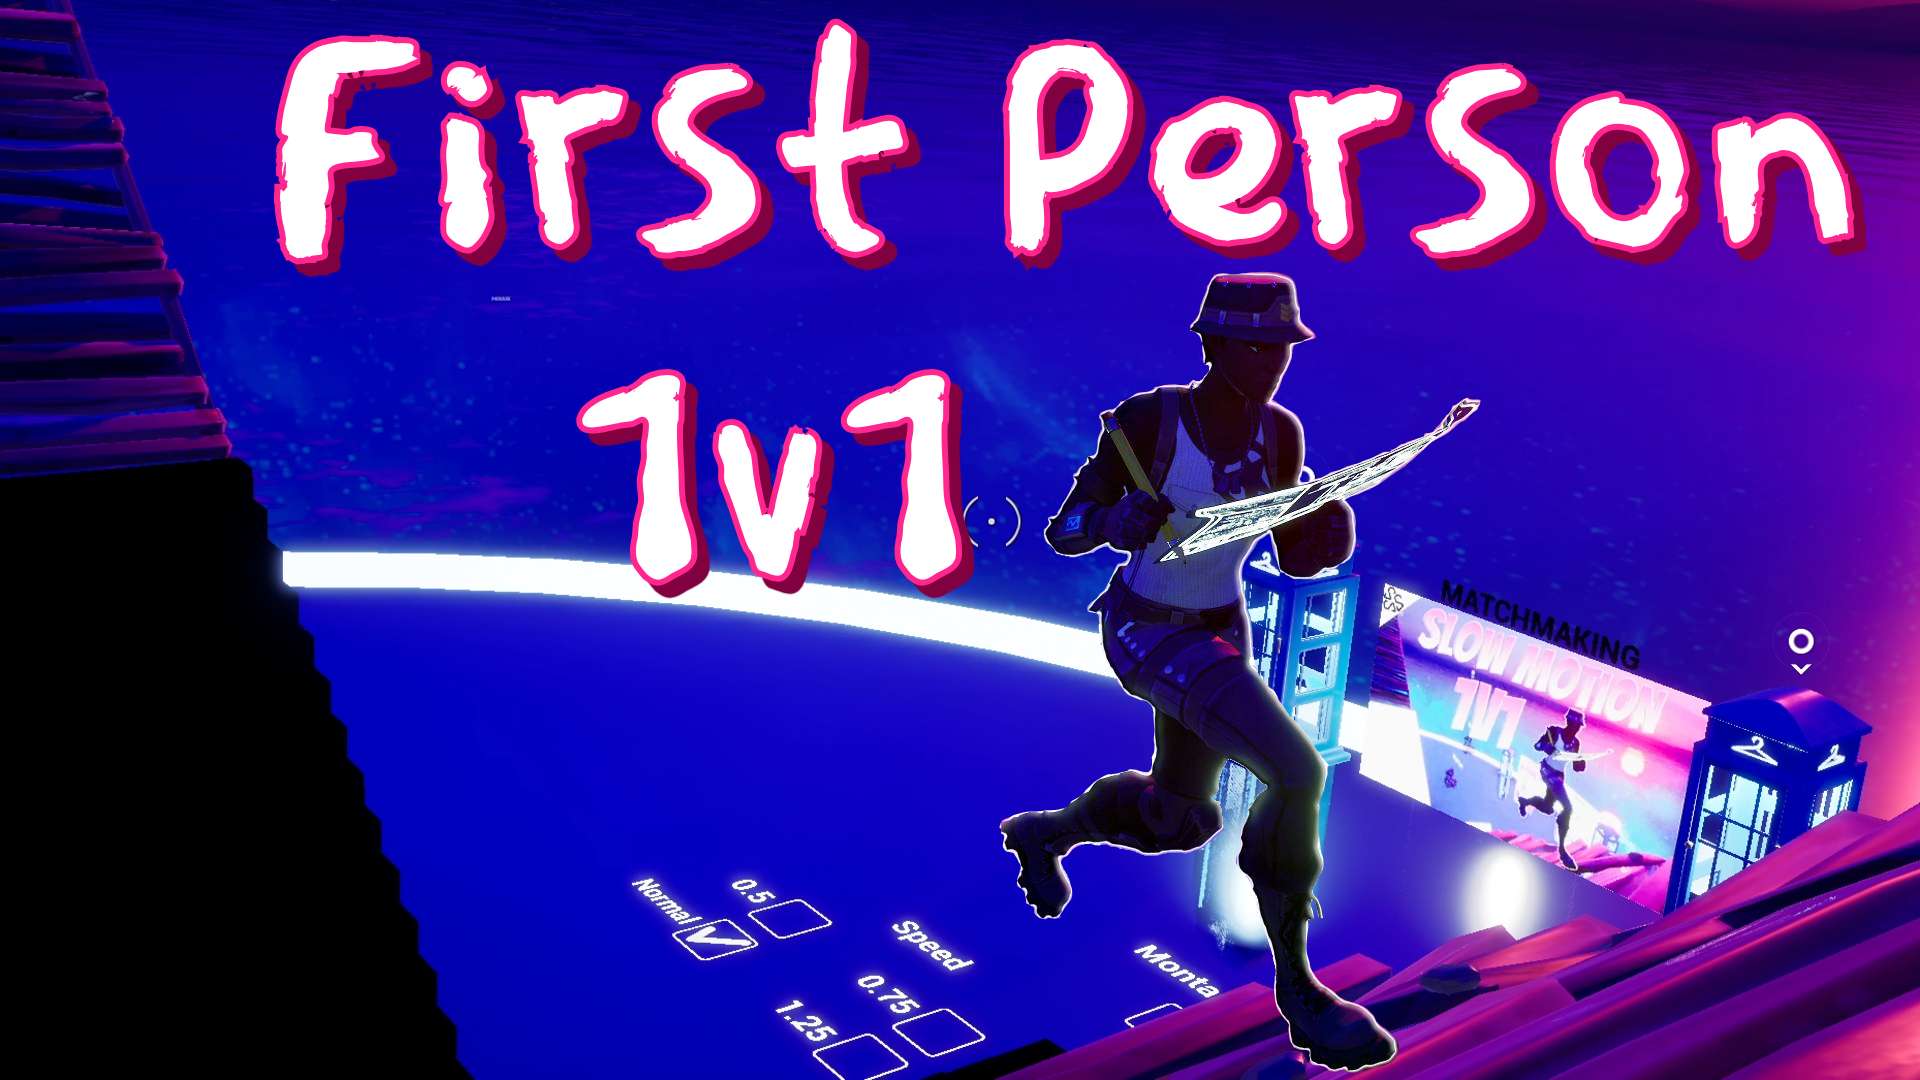 FIRST PERSON 1V1's - With FOV Slider